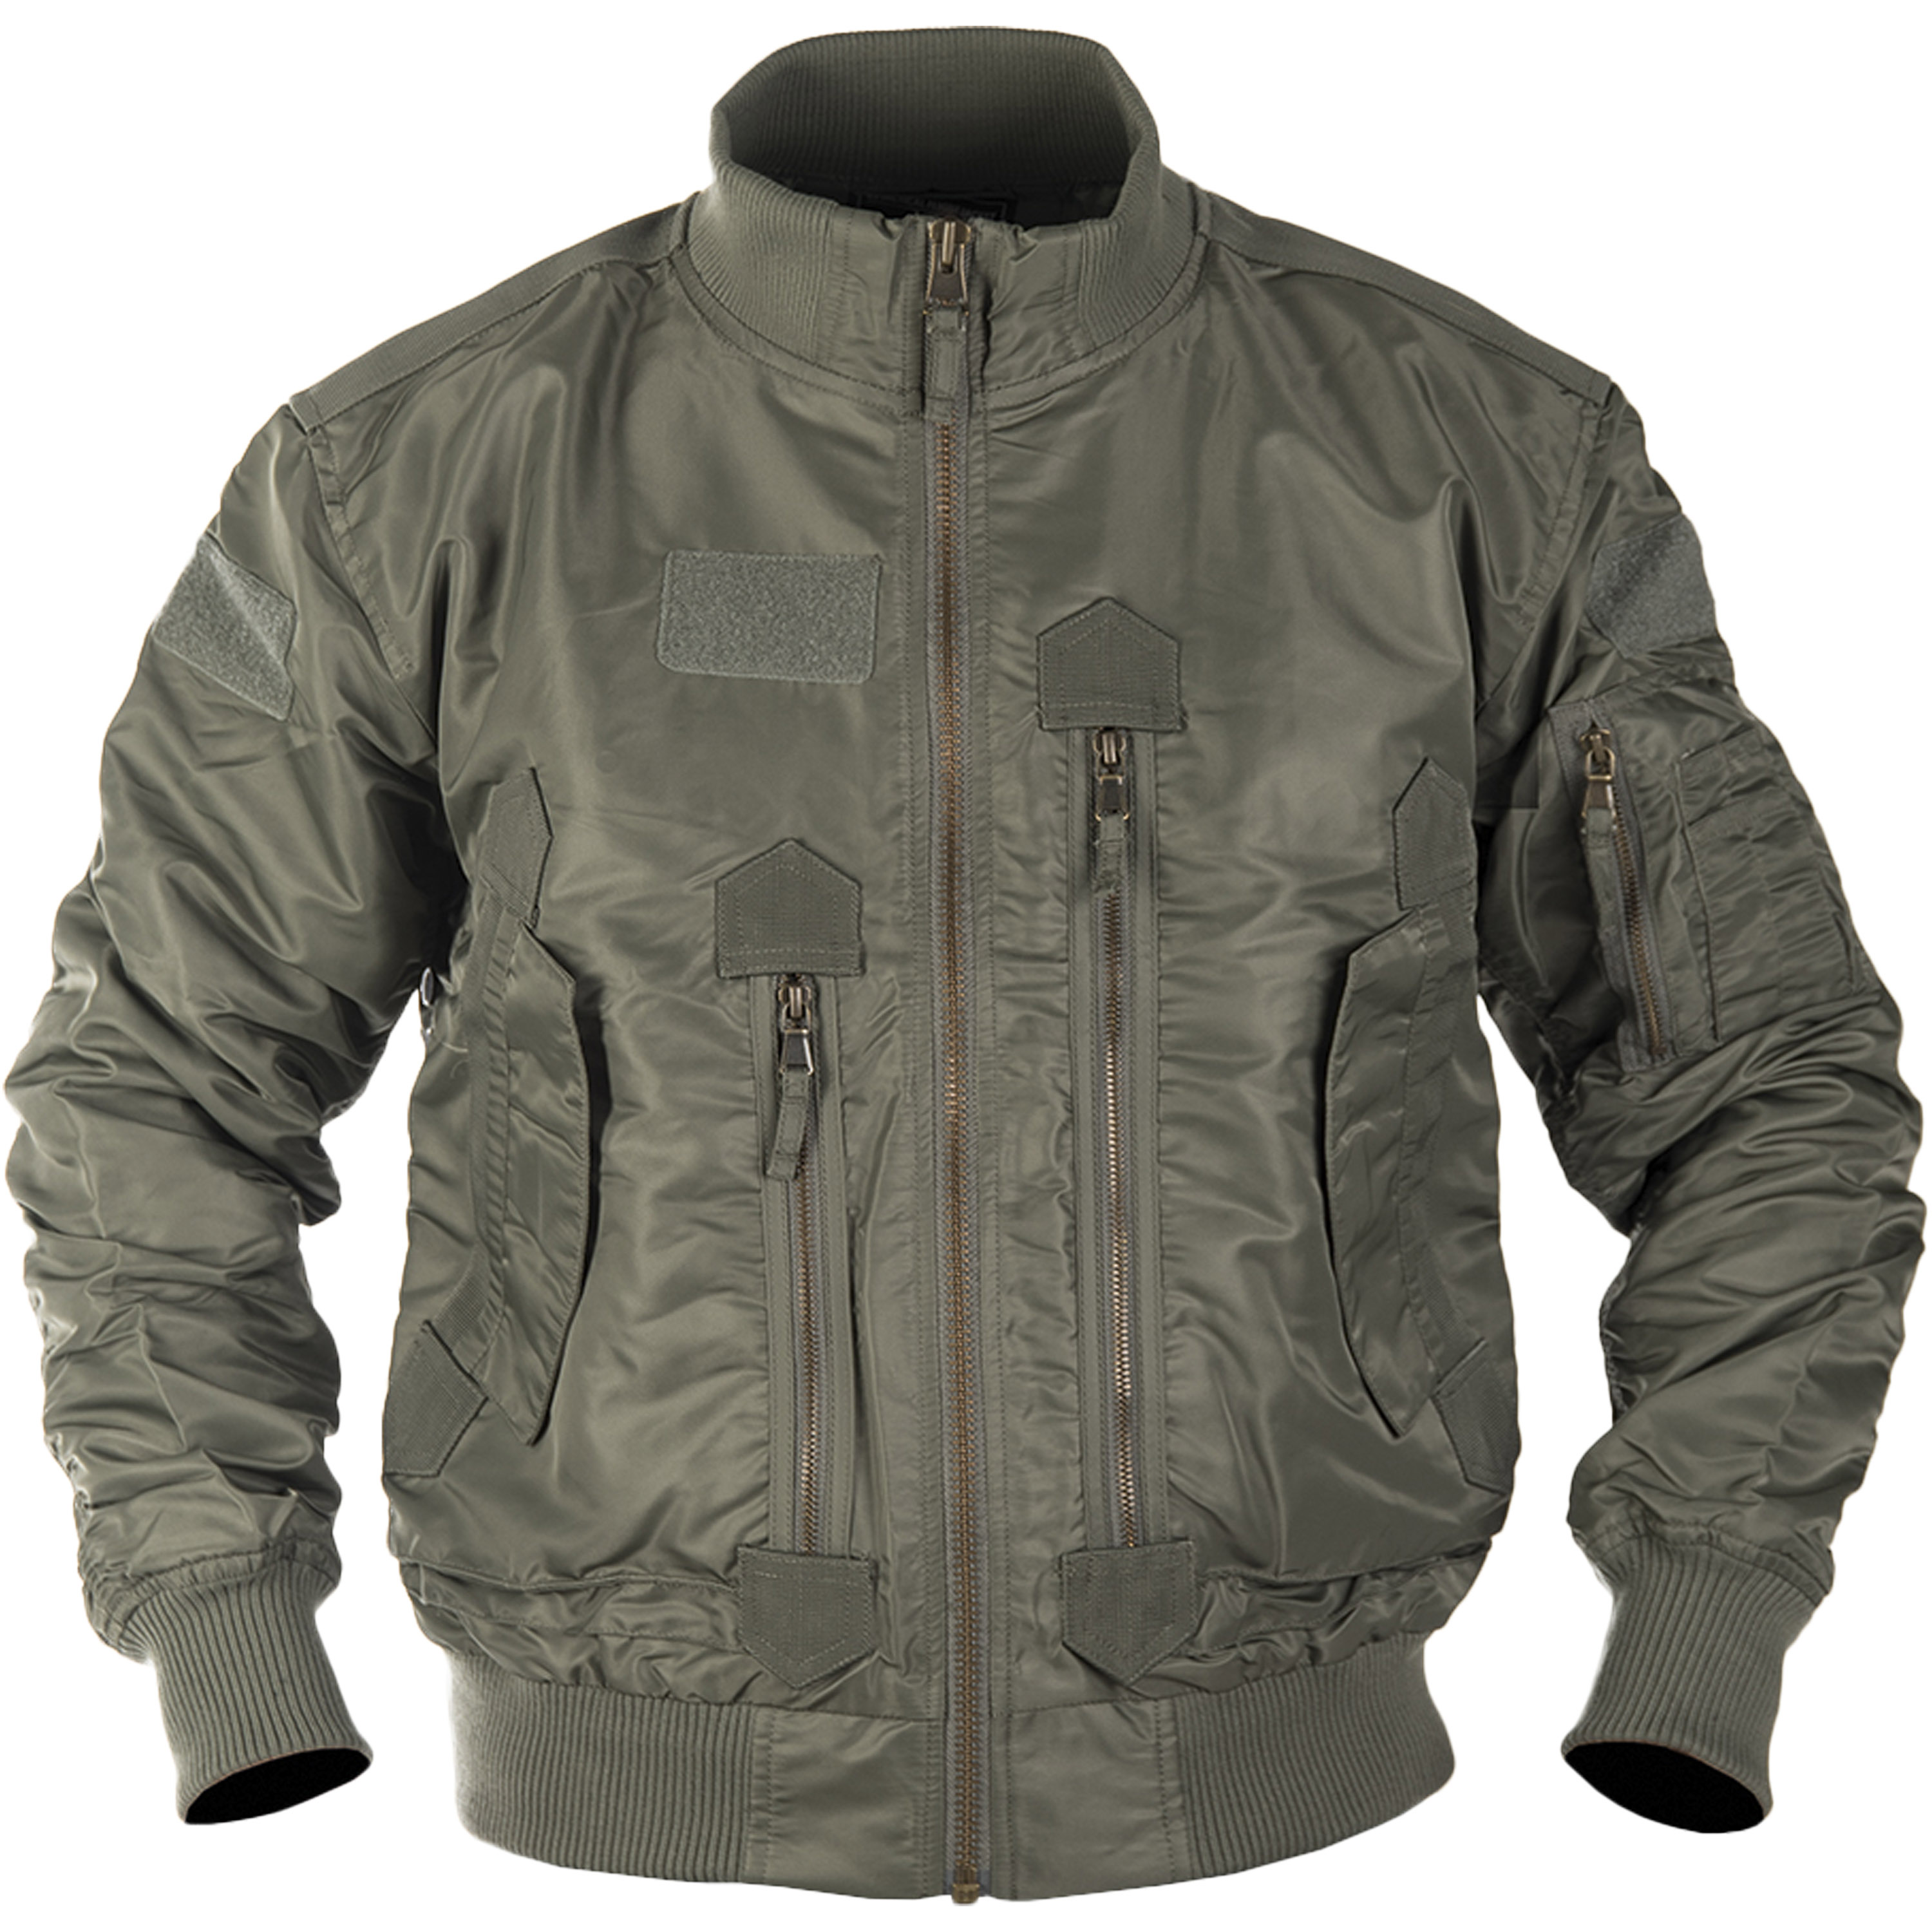 Purchase the US Tactical Flight Jacket olive by ASMC